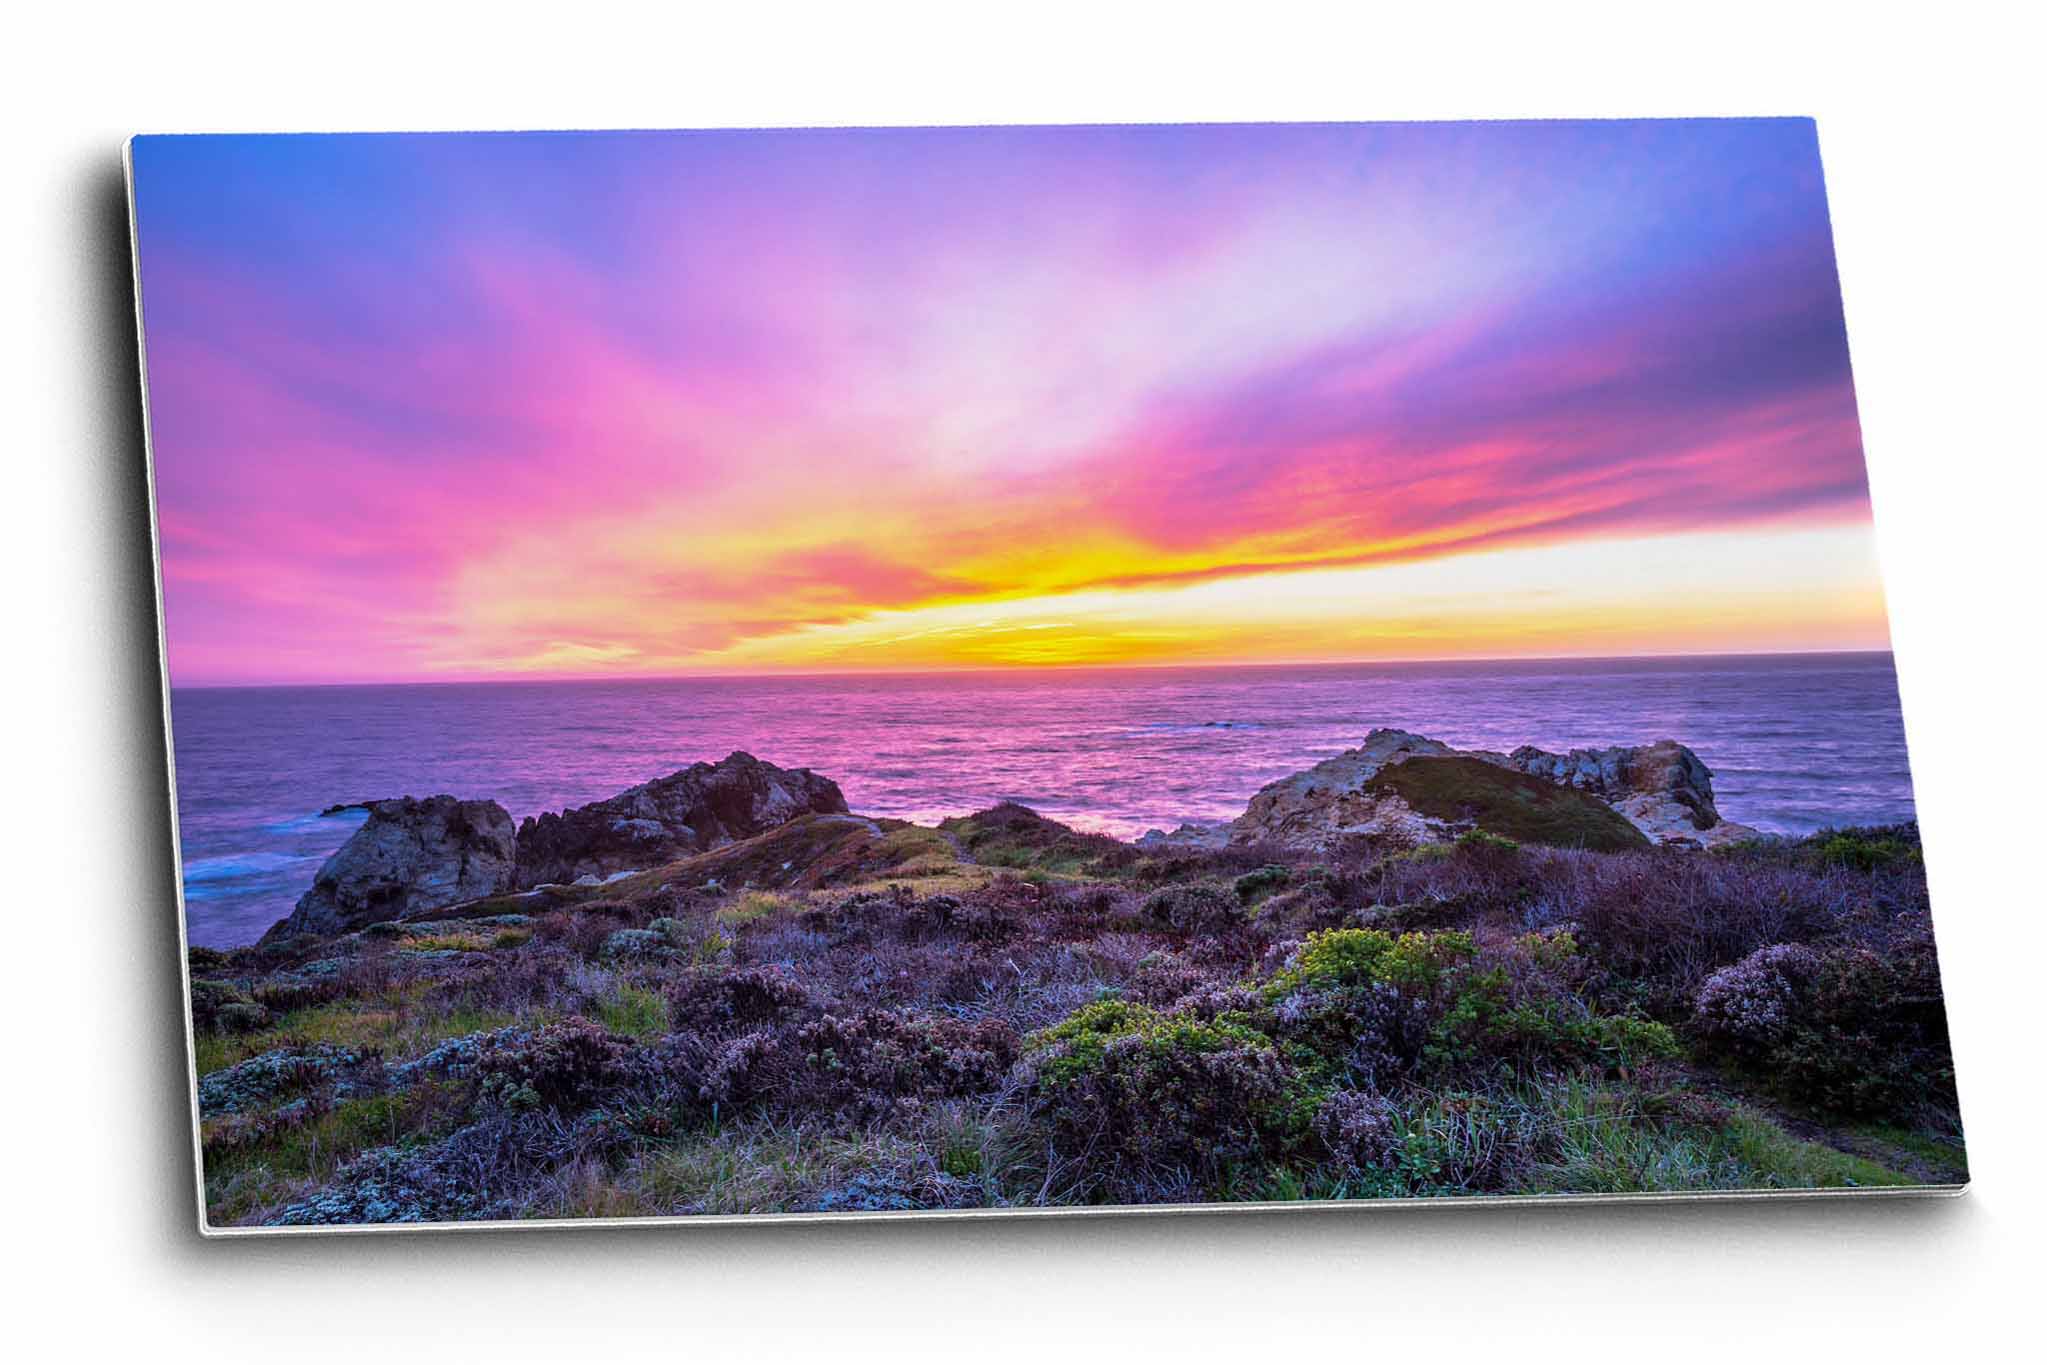 Coastal metal print on aluminum of a warm and colorful sunset over the Pacific Ocean along the coast of Big Sur, California by Sean Ramsey of Southern Plains Photography.